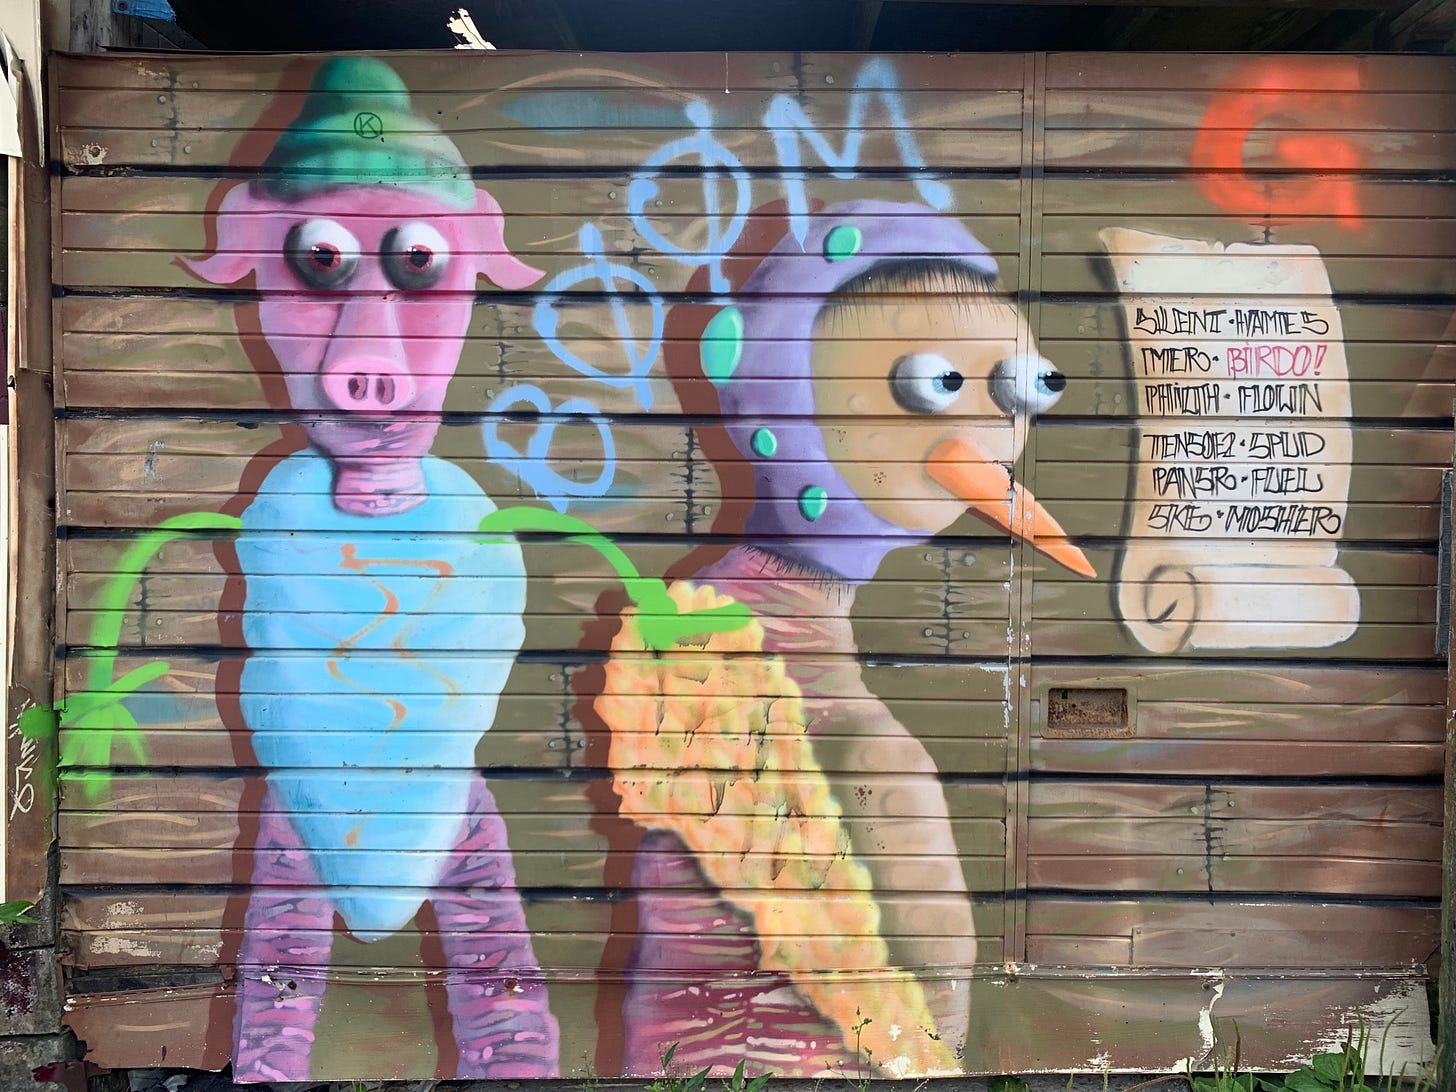 A spray-painted mural of a pig with a green toque and blue cotton-candy-like body and a bird wearing some sort of helmet, with a barely legible scroll to the right that says "BIRDO" in red among other black text. Both characters have very piercing eyes and no eyelids.